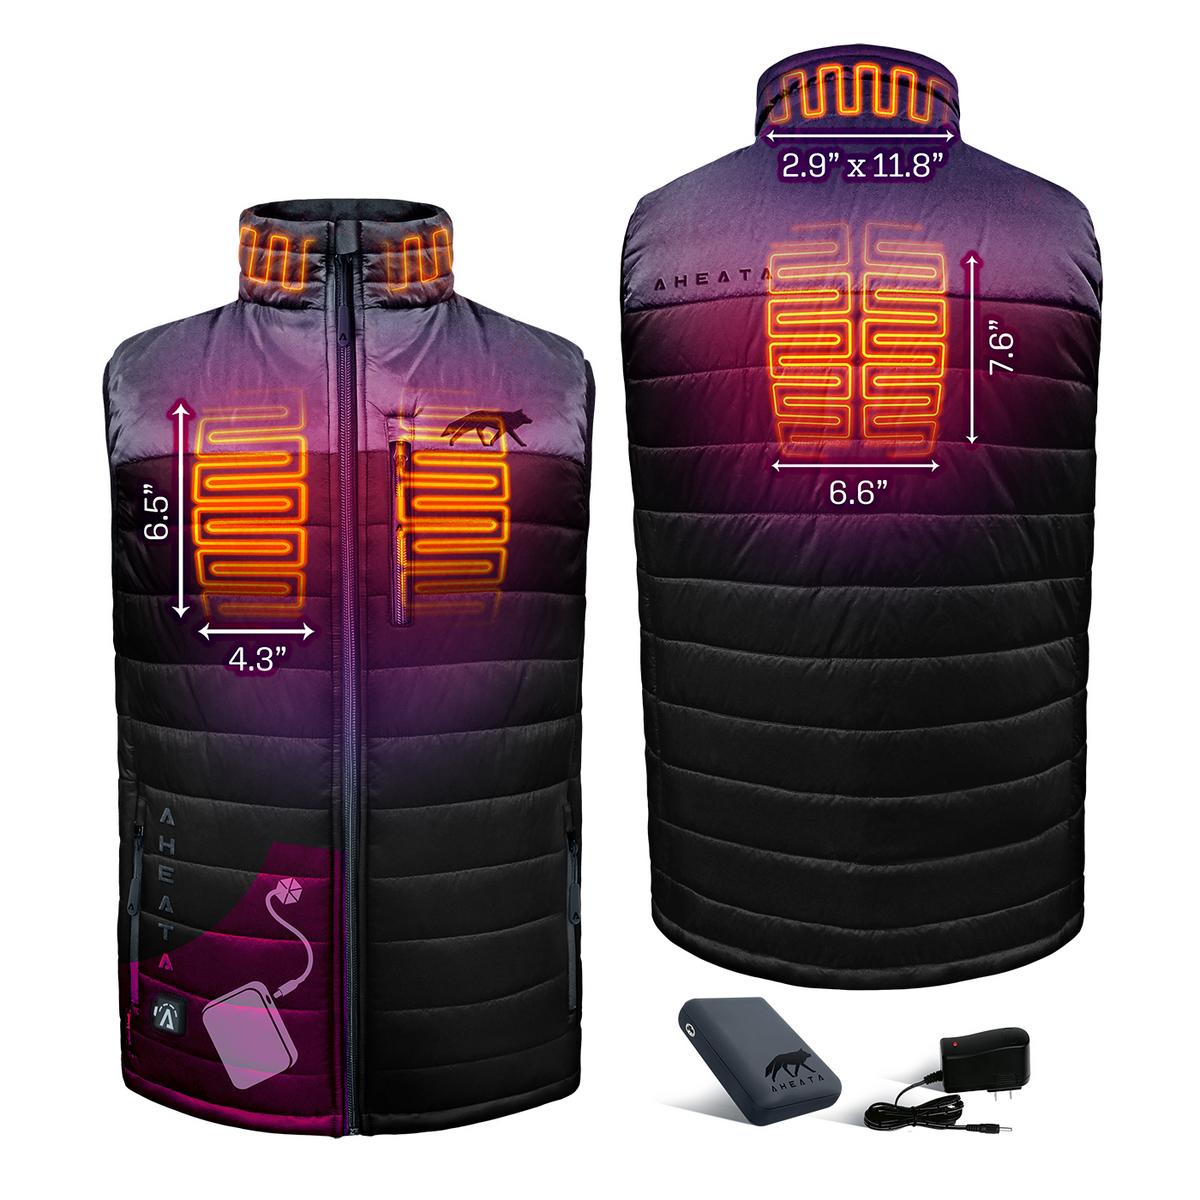 Aheata 7V Men's Heated Vest with Battery Pack - Back